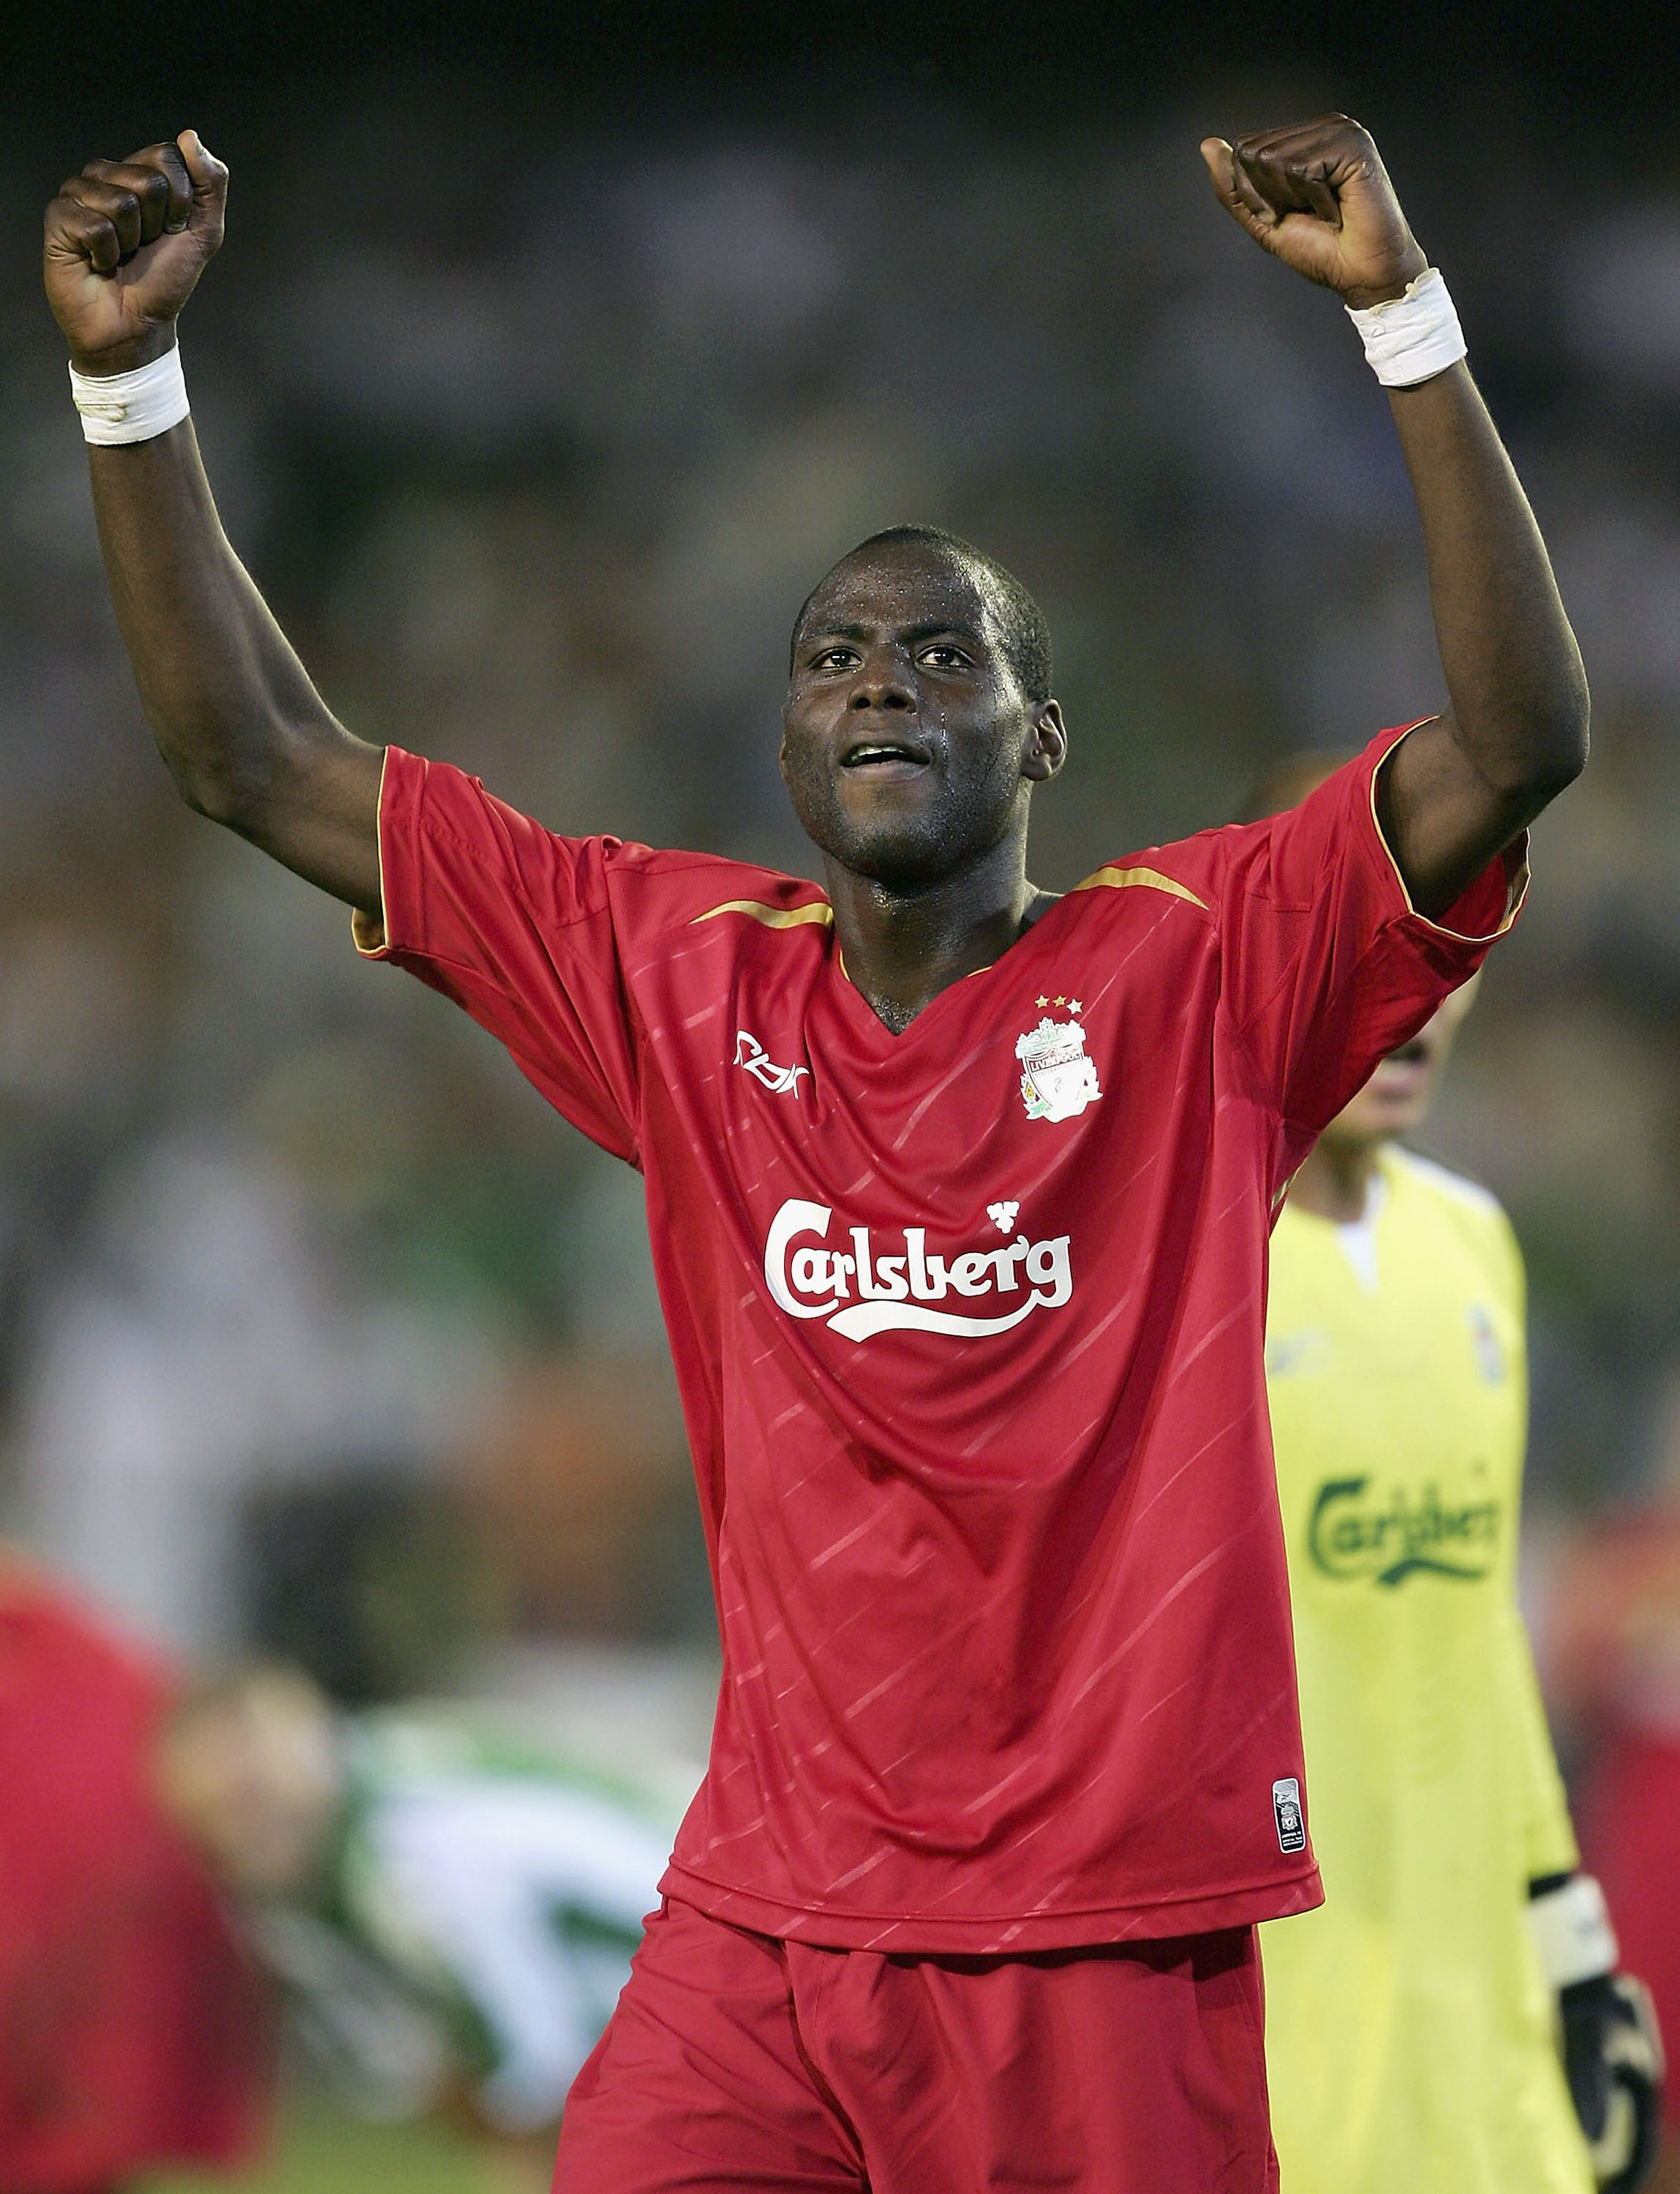 SEVILLE, SPAIN -  SEPTEMBER 13:  Djimi Traore of Liverpool celebrates after Liverpool's 2-1 victory in the UEFA Champions League Group G match between Real Betis and Liverpool at the Estadio Ruiz de Lopera on September 13, 2005  in Seville, Spain. (Photo